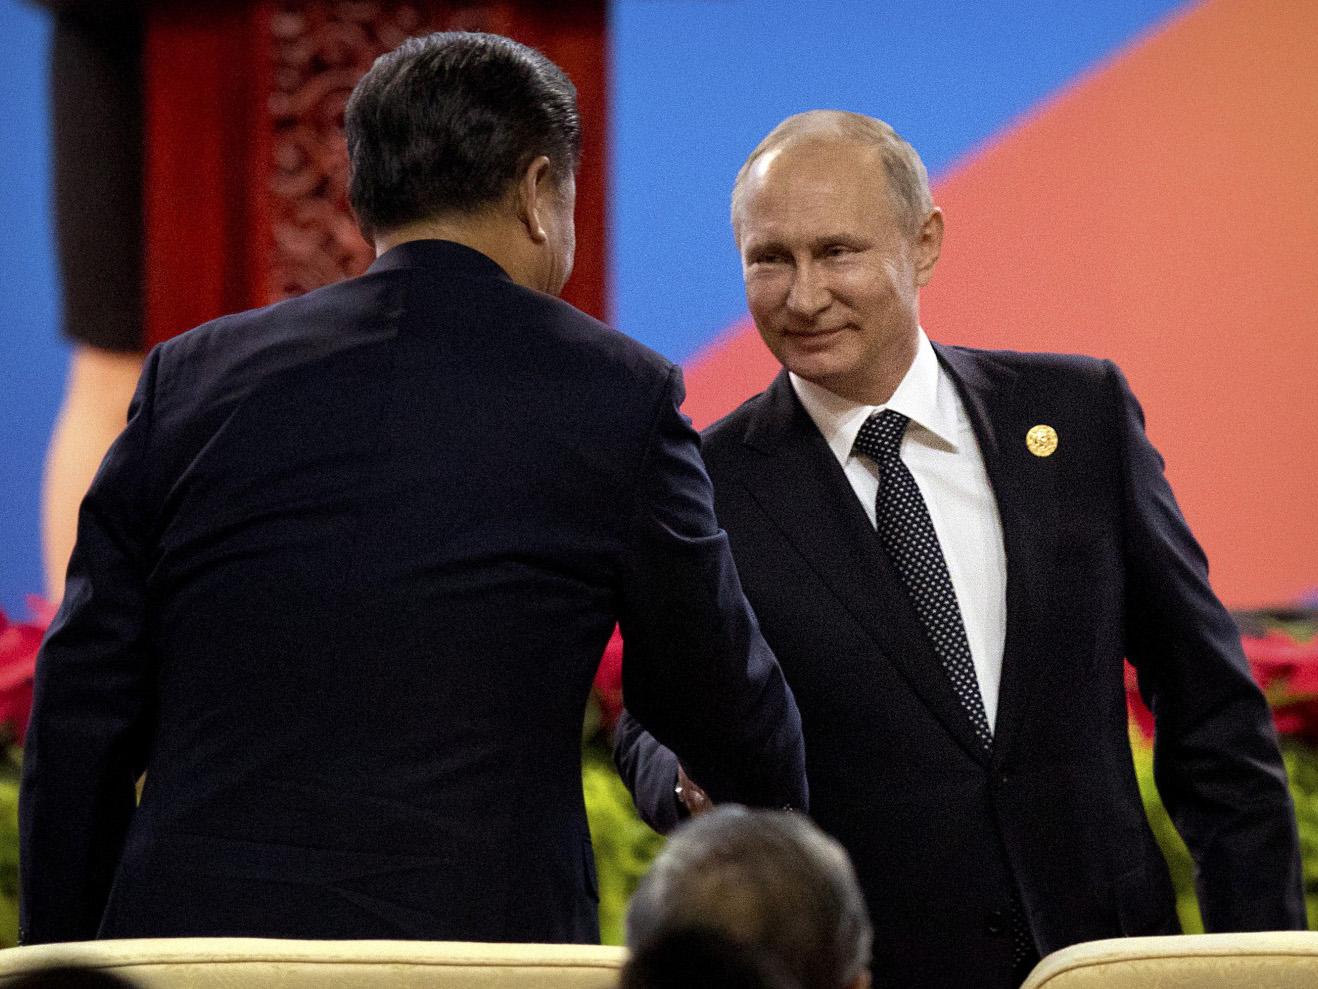 Russian President Vladimir Putin shakes hands with Chinese President Xi Jinping on Sunday during the Belt and Road Forum in Beijing